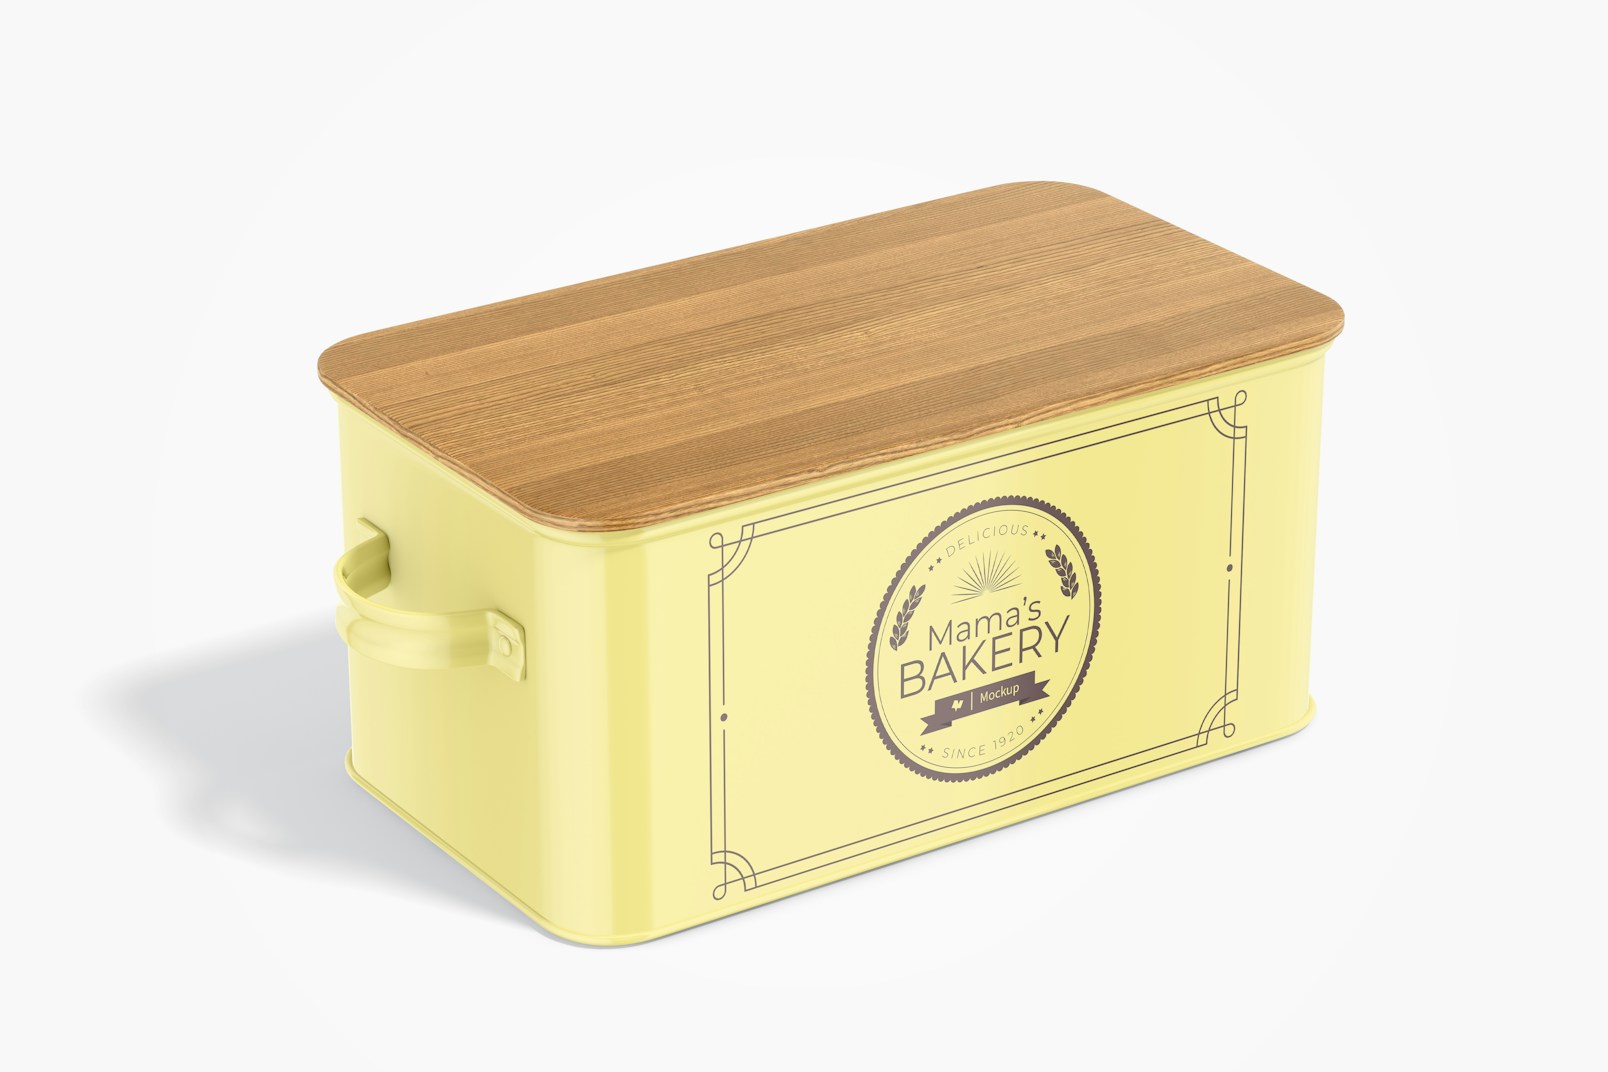 Bakery Box With Bamboo Lid Mockup, Side View